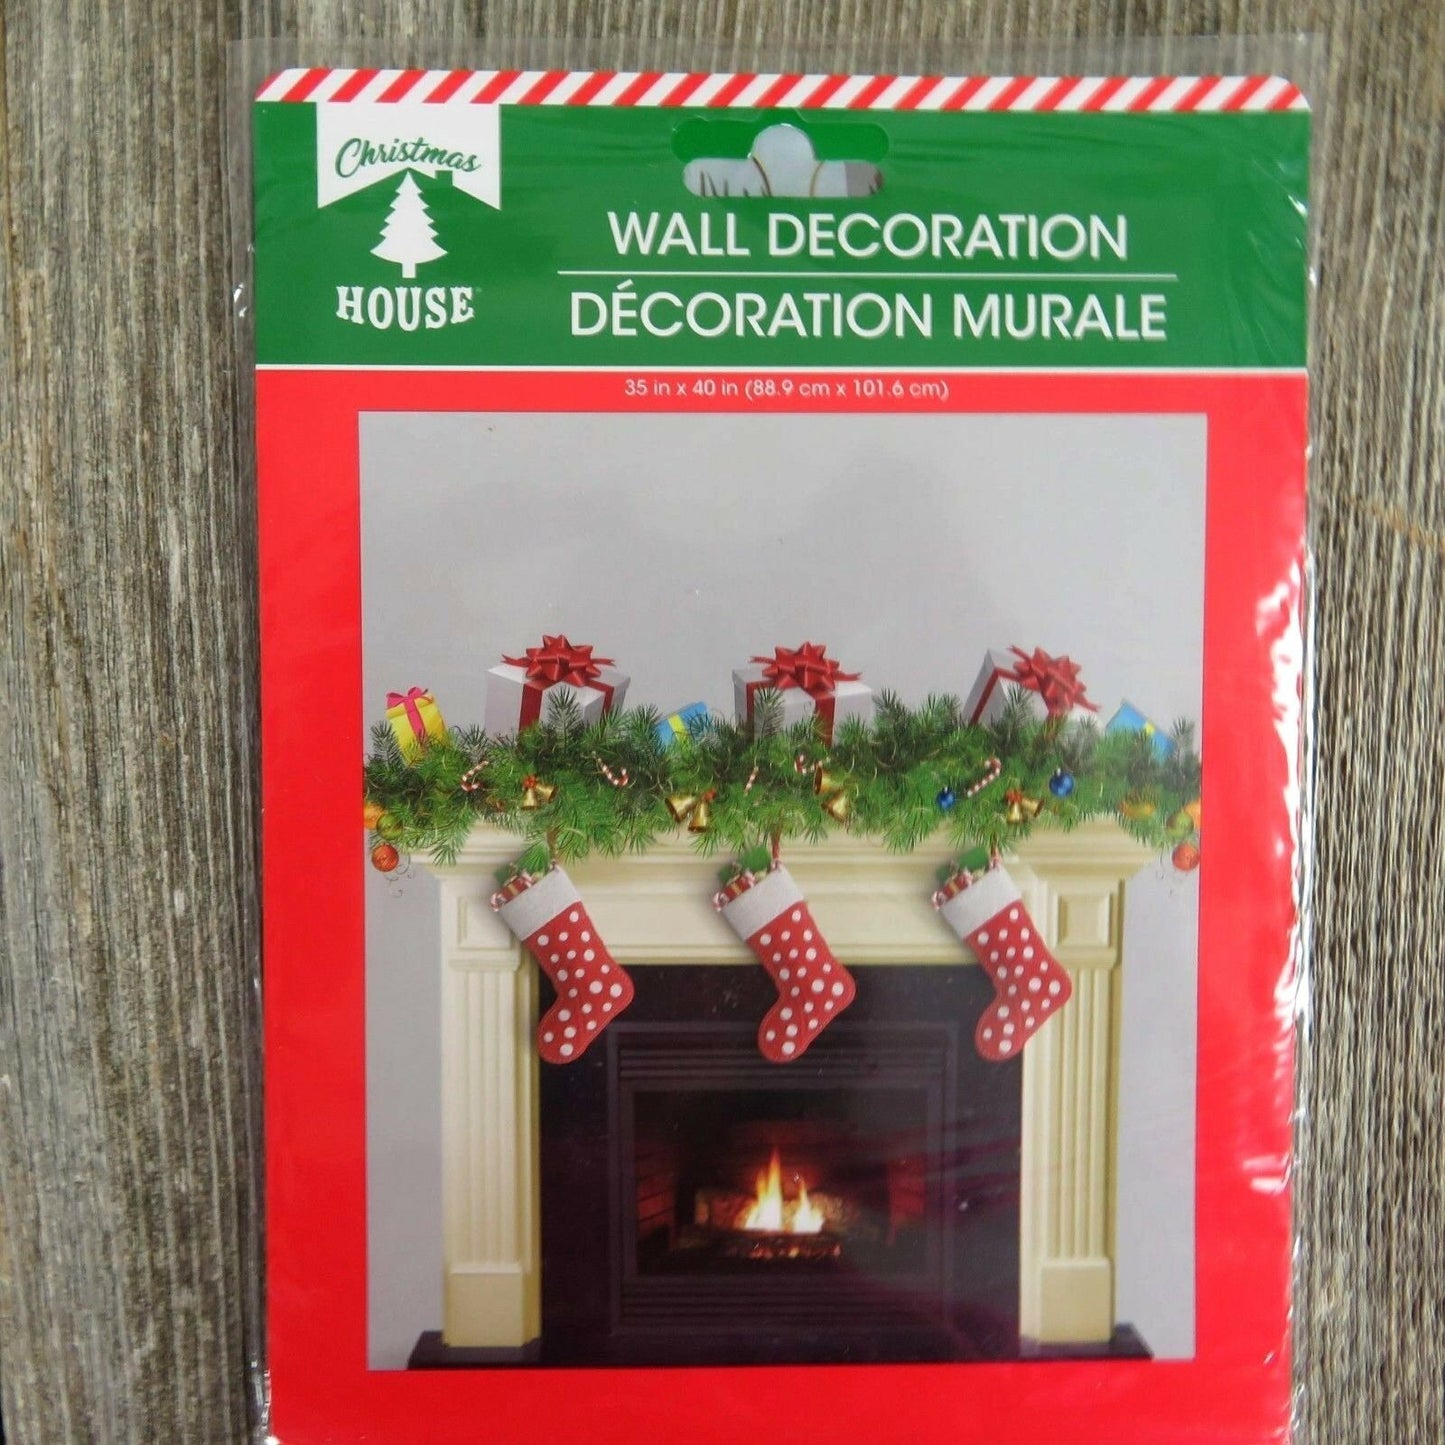 Fireplace Hearth Wall Backdrop Cover Panel Stockings Christmas Holiday Dorm